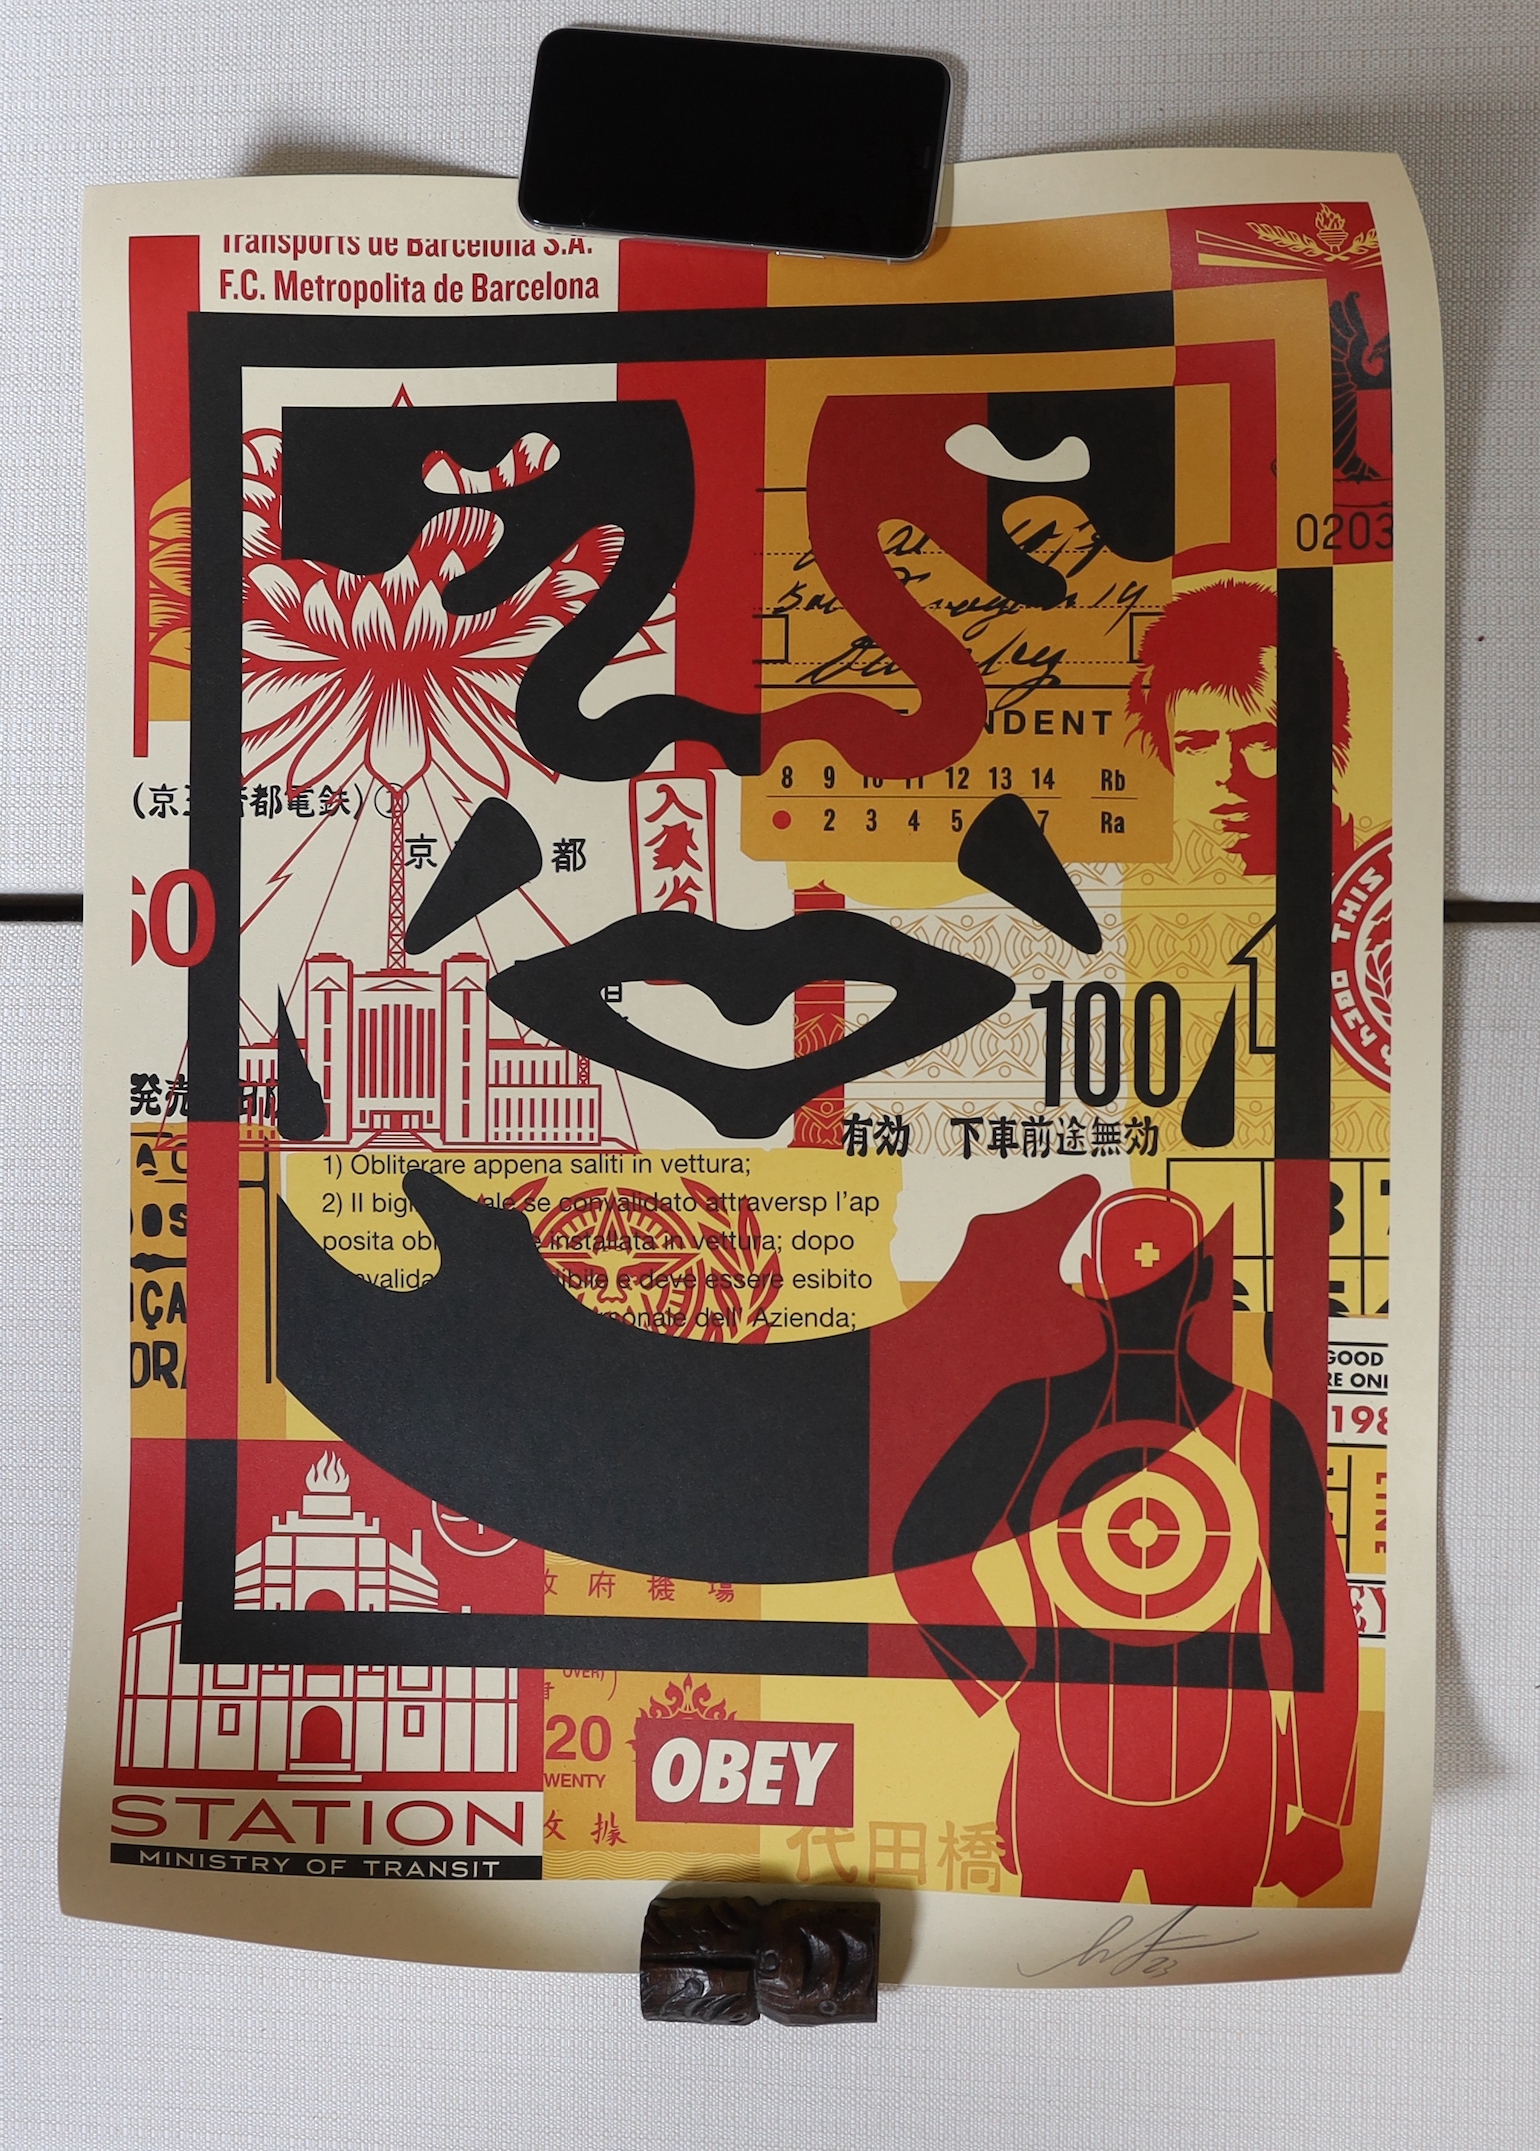 Shepherd Fairey (b.1970), three lithograph poster, Obey, signed and dated ‘23, unframed, 61 x 46cm